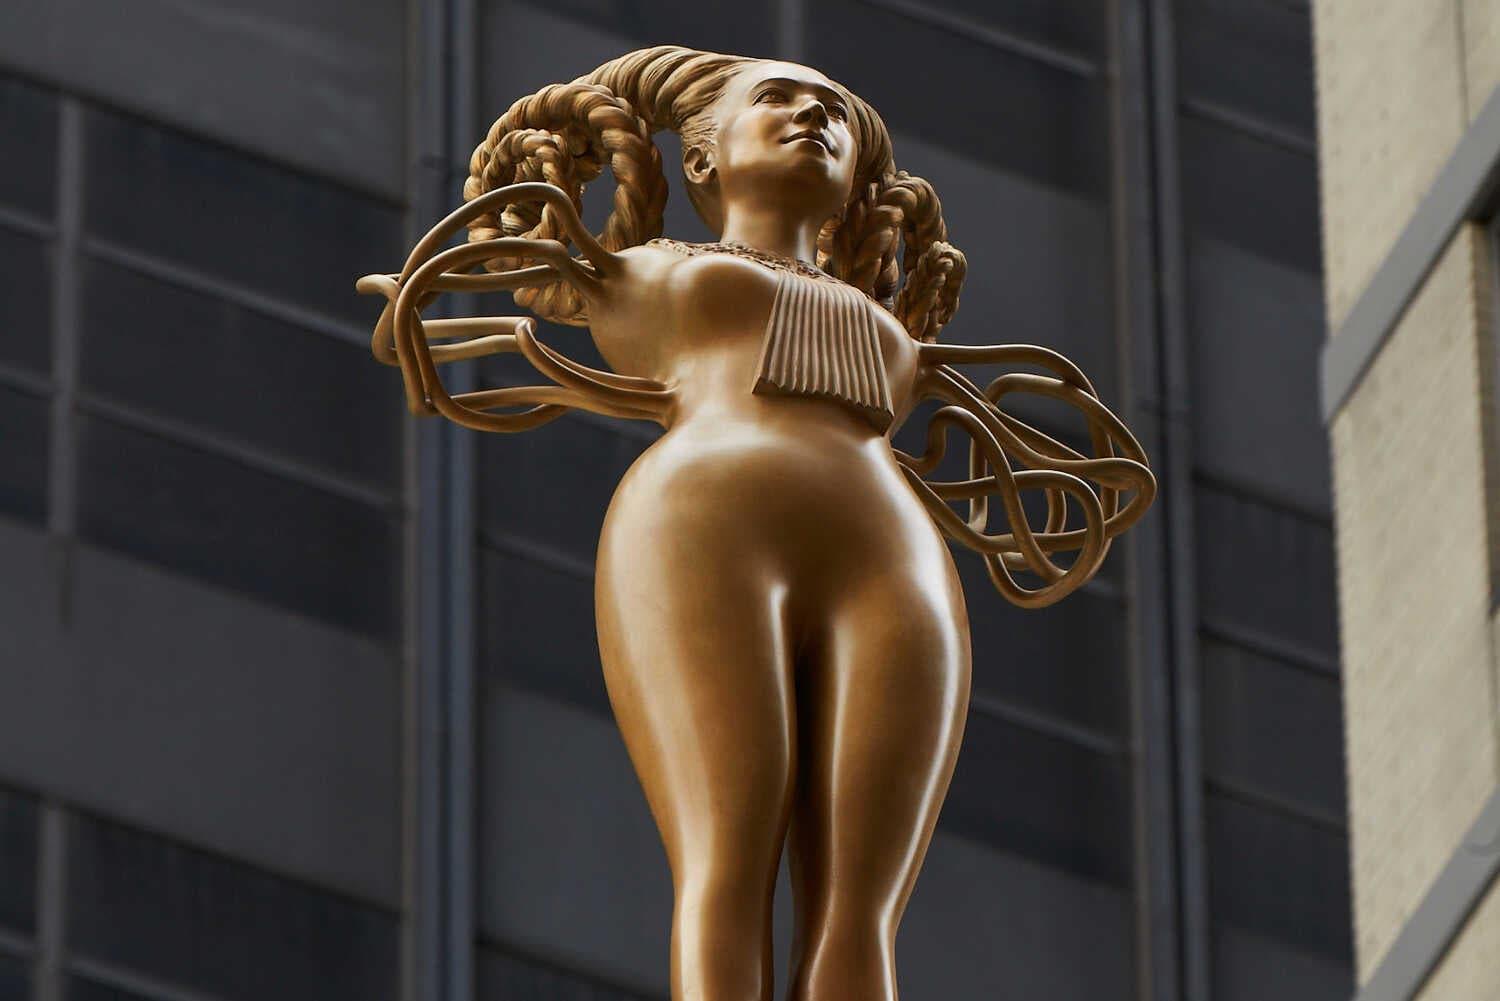 A golden eight-foot female sculpture, emerging from a pink lotus flower near Madison Square Park, wears Justice Ruth Bader Ginsburg’s signature lace collar.